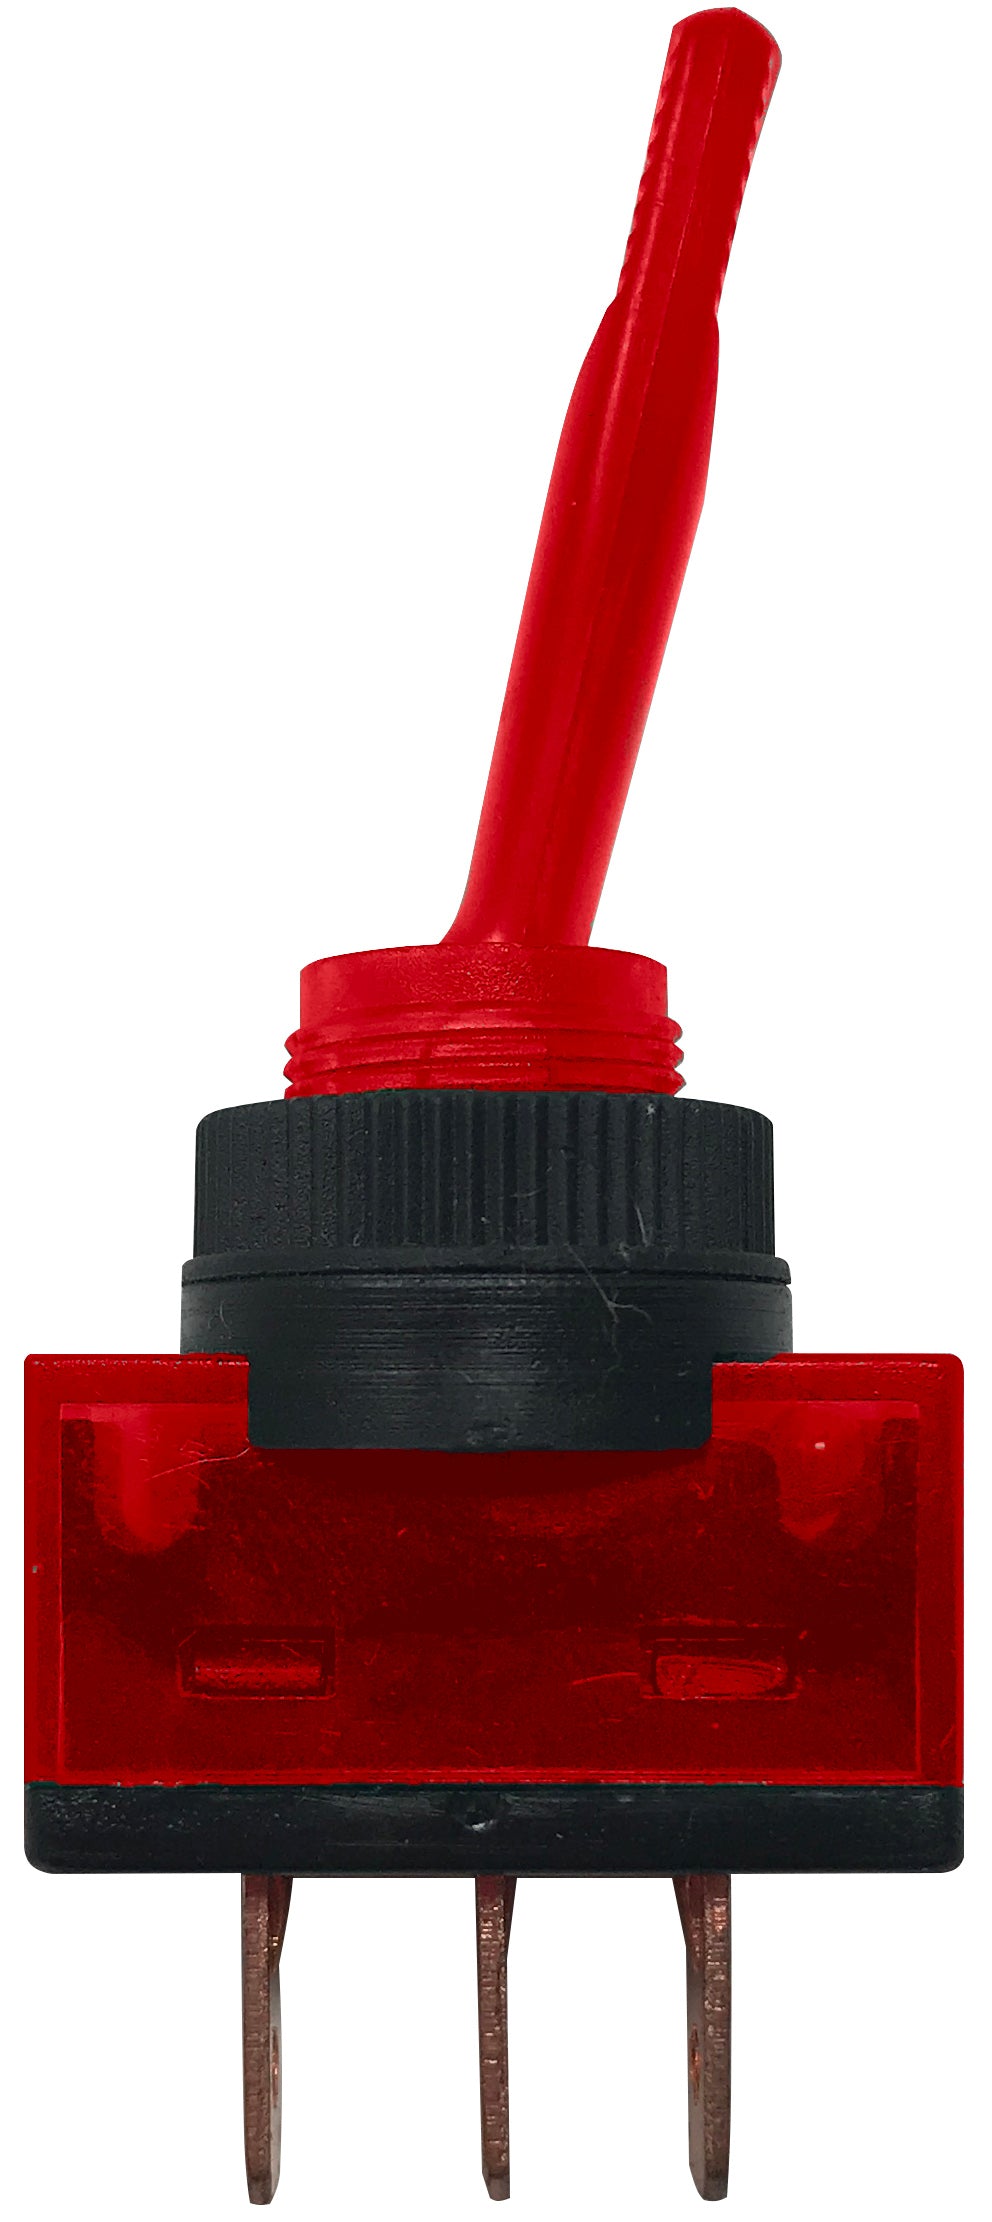 Universal Red Illuminated ON / OFF Toggle Switch SPST - 20 Amp @ 12 Volt